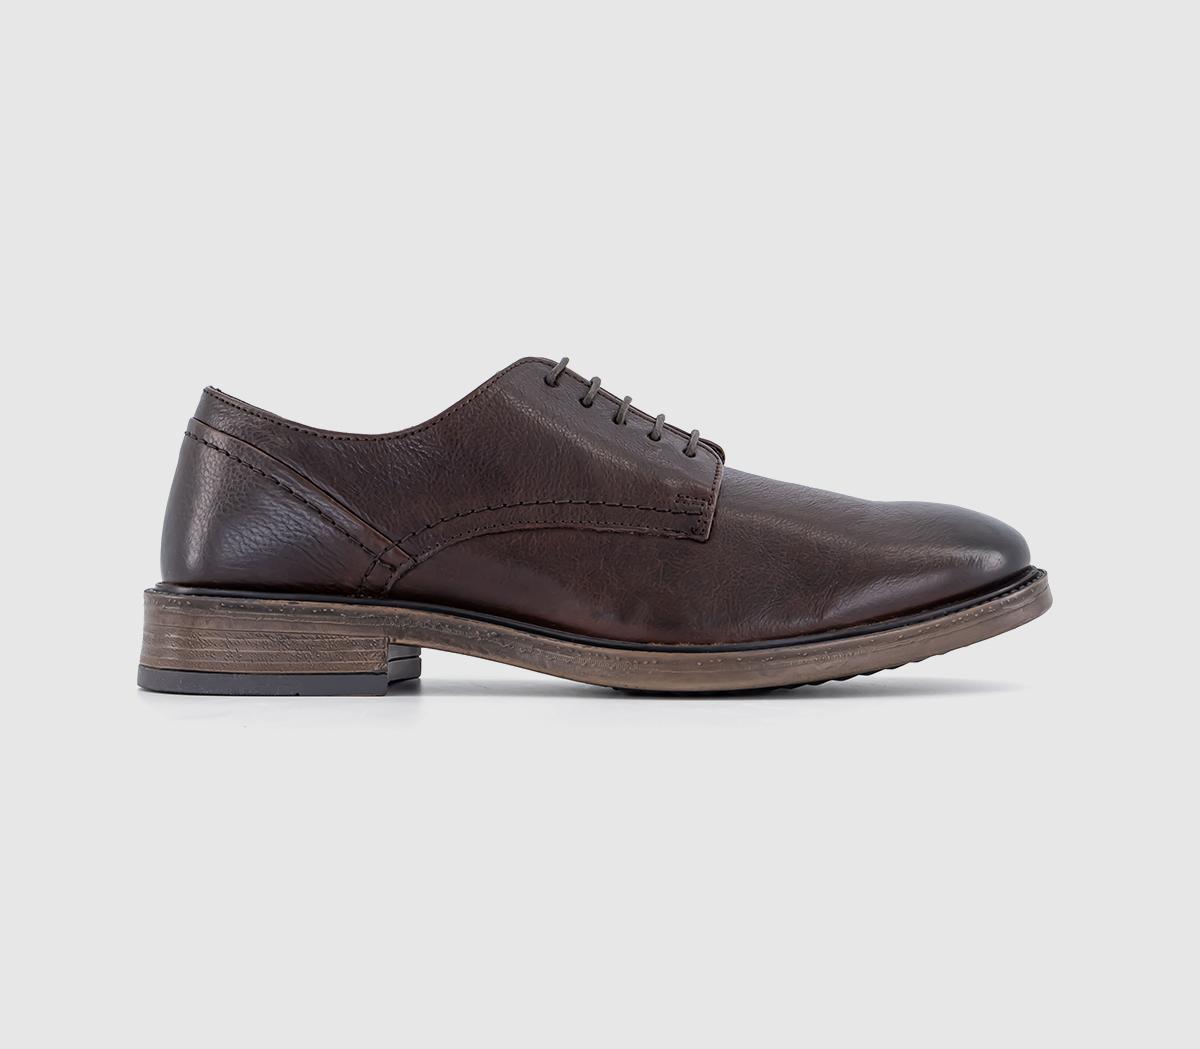 OFFICECadeleigh Casual Leather Derby ShoesBrown Leather